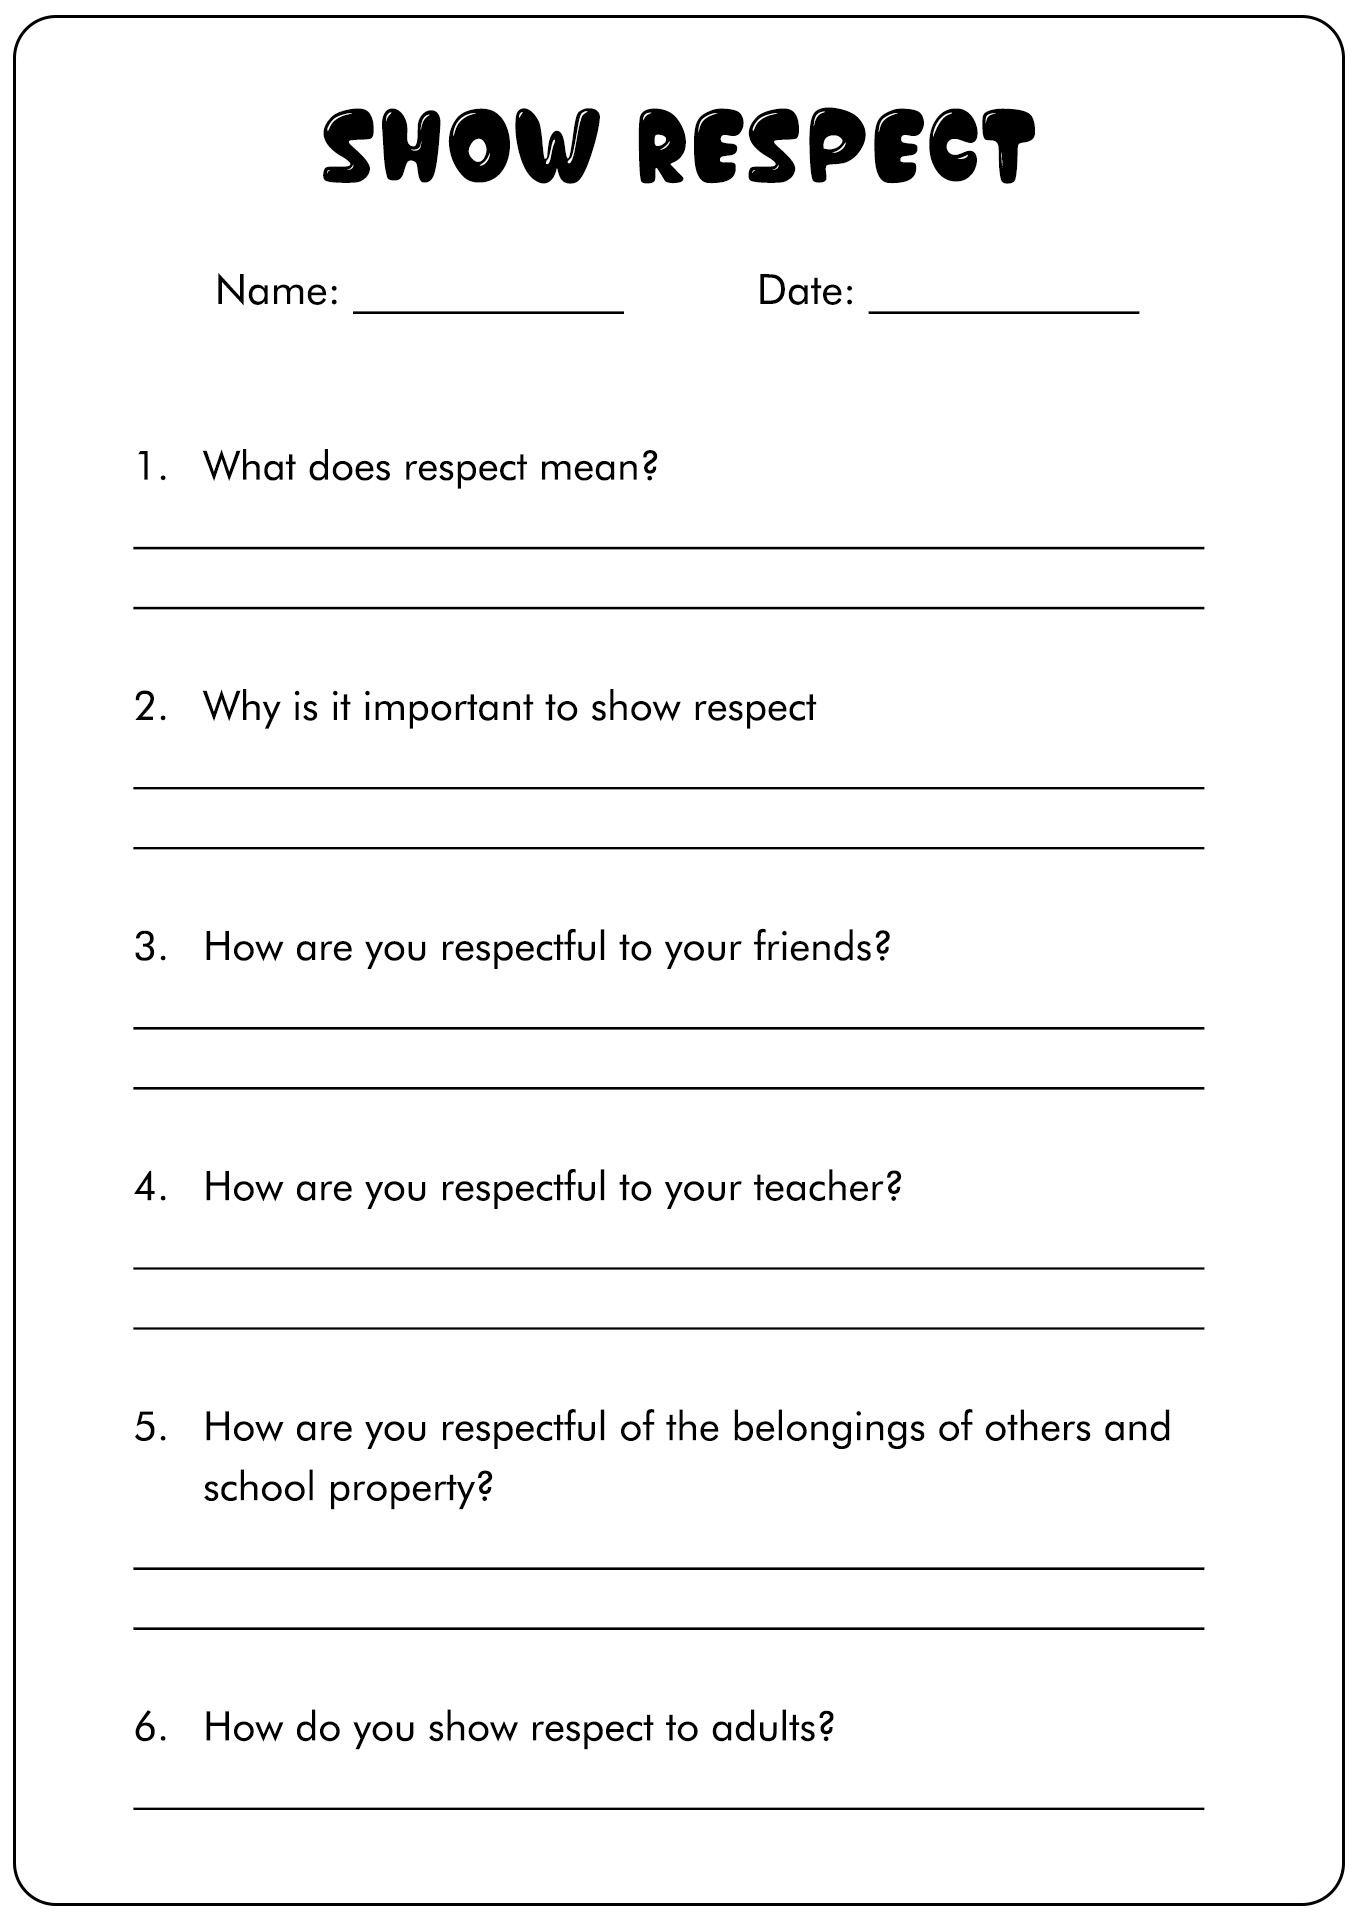 respecting-others-property-worksheet